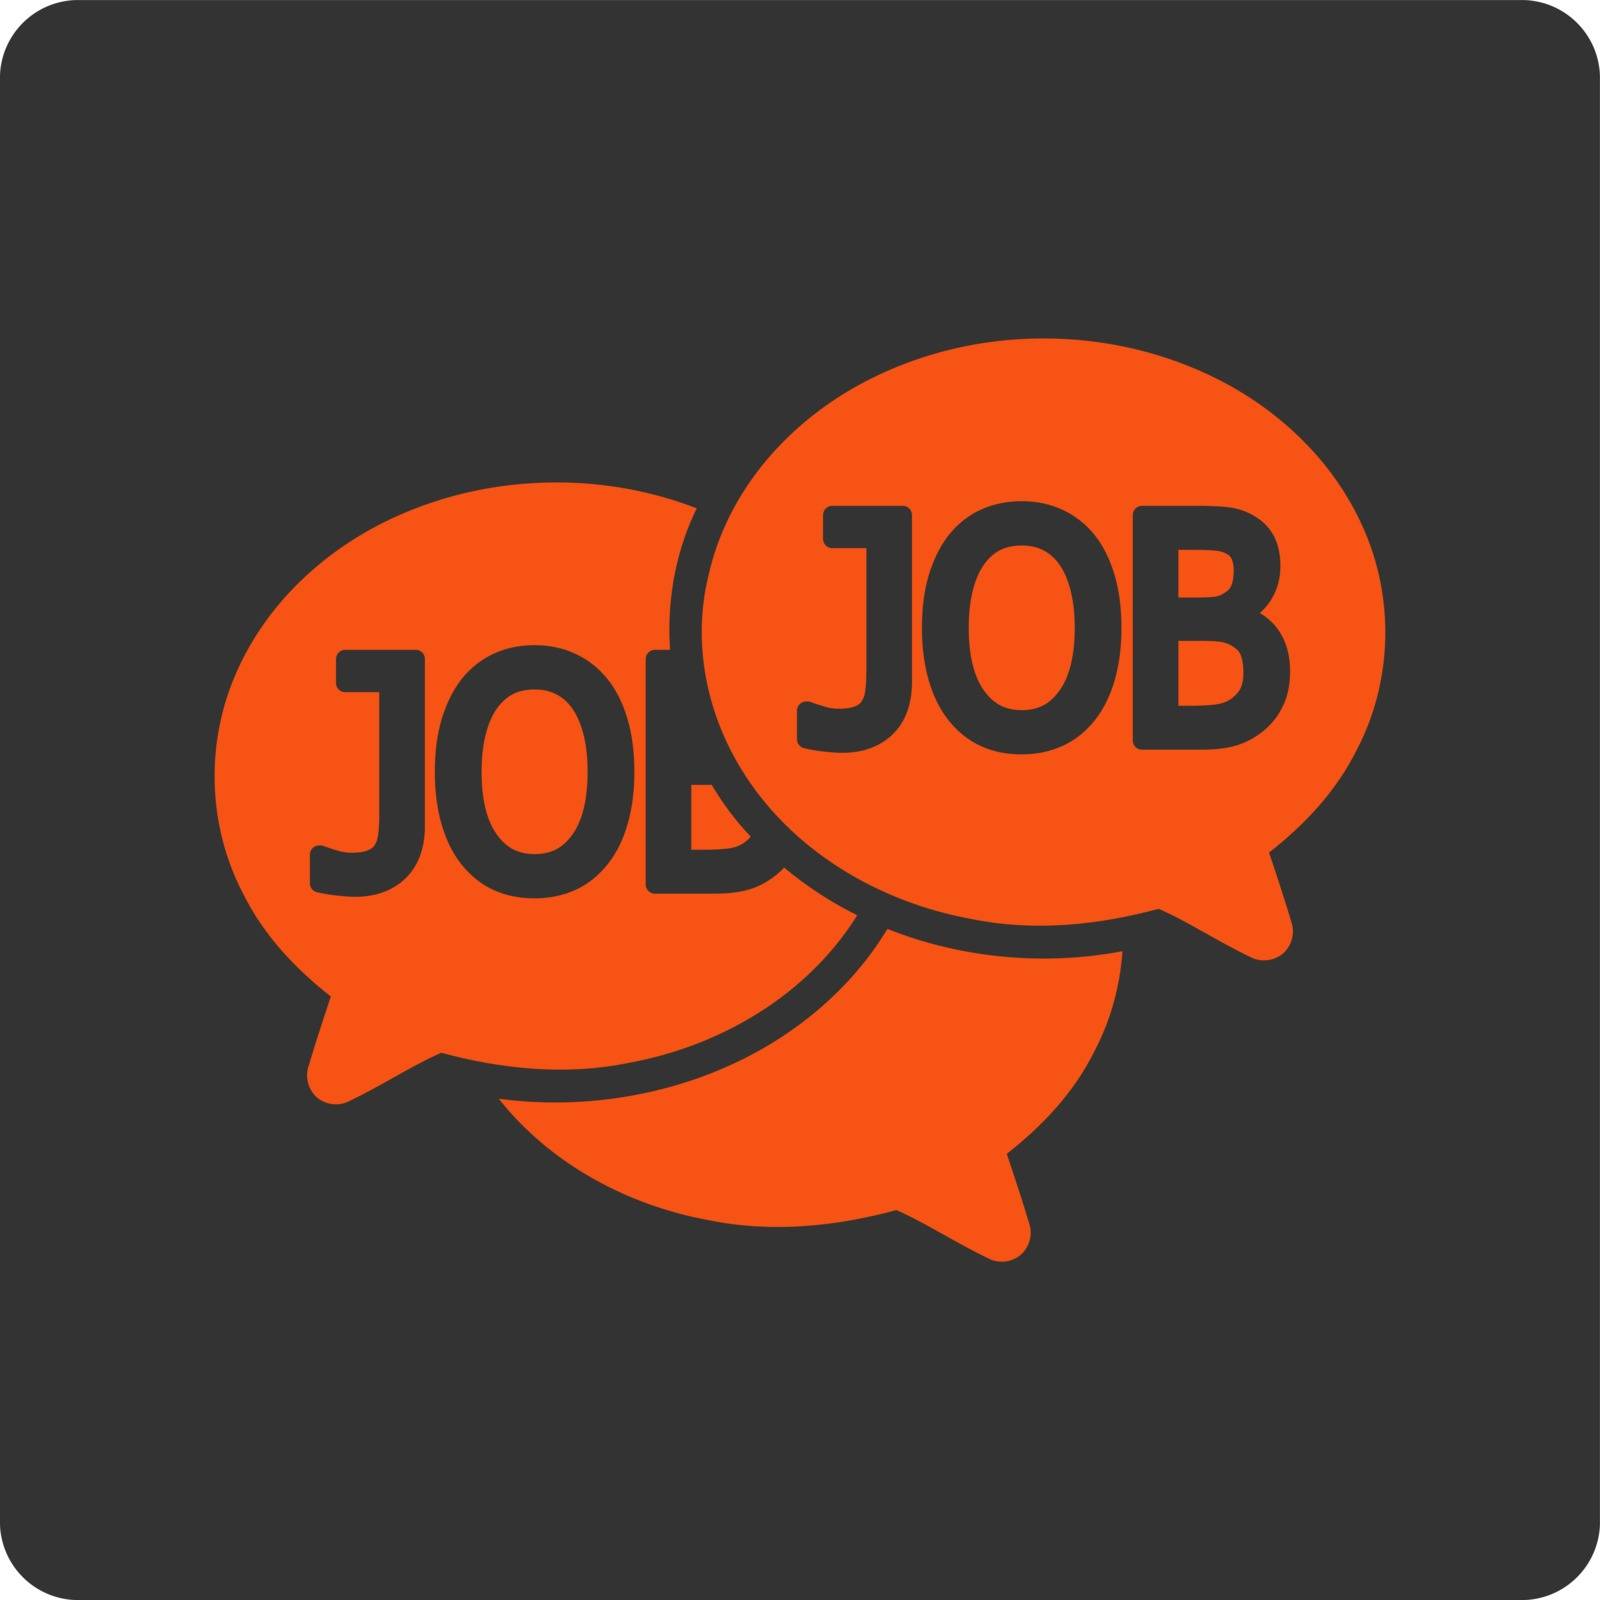 Labor Market icon. This flat rounded square button uses orange and gray colors and isolated on a white background.